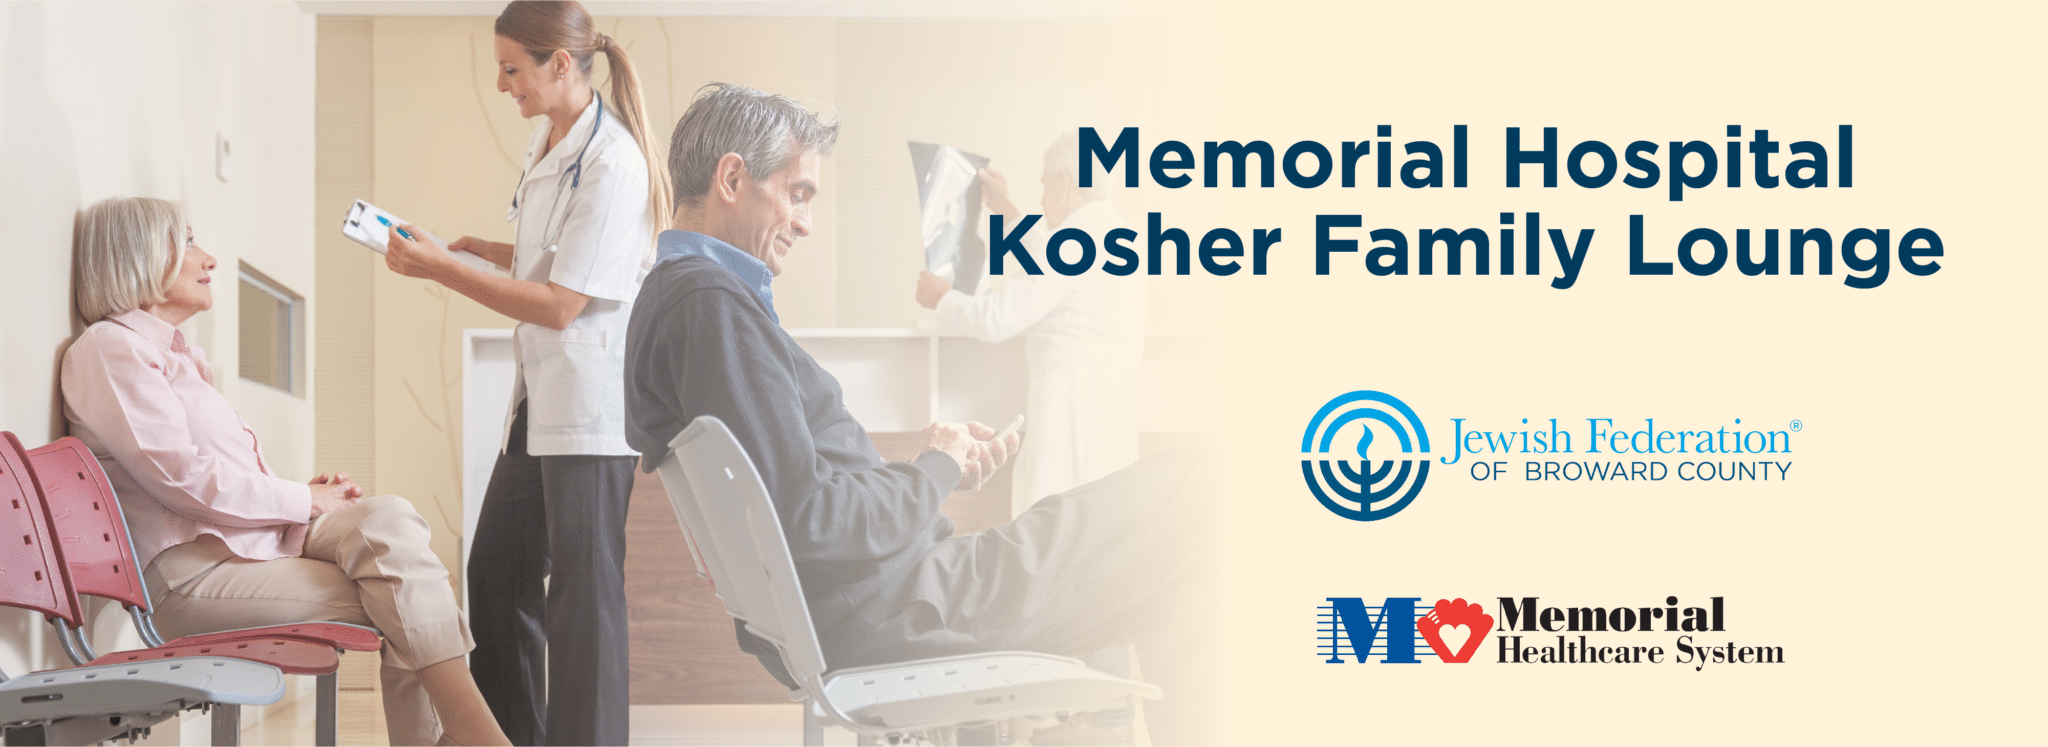 Memorial Hospital Kosher Family Lounge Campaign Graphics Landing Page Banner